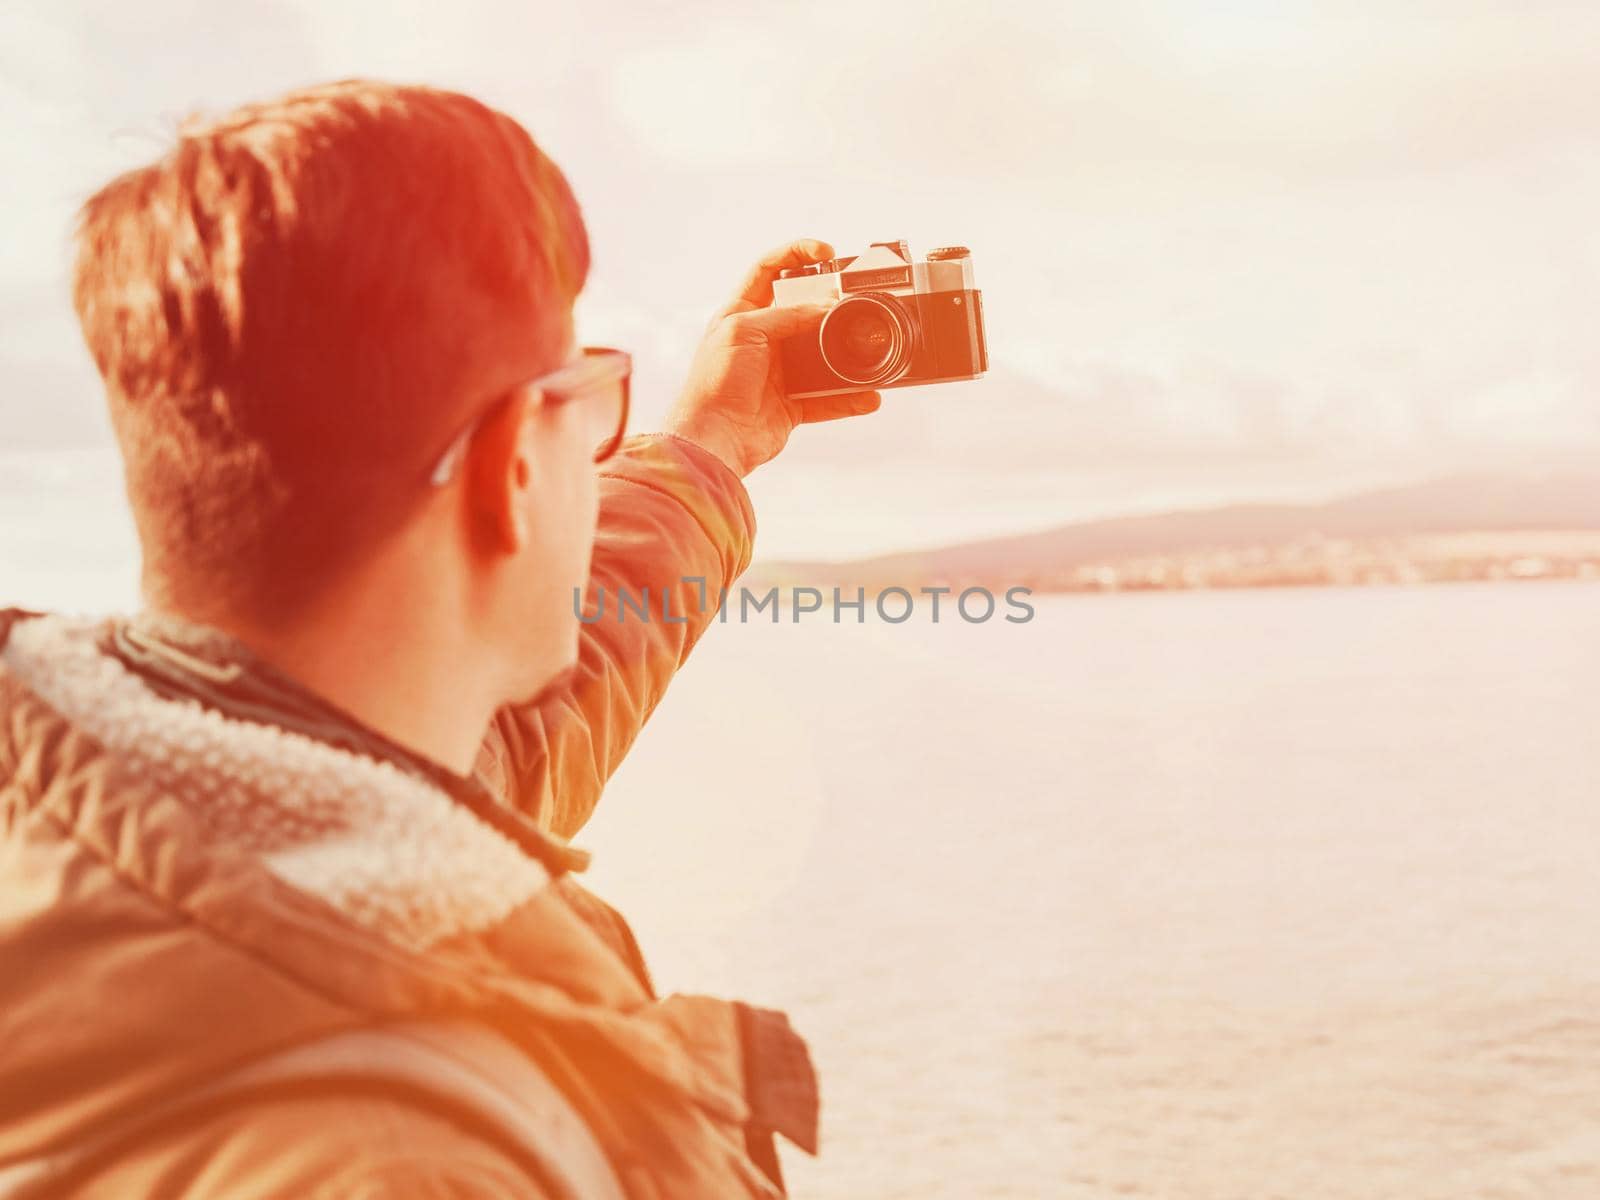 Traveler young man doing selfie with old photo camera on coastline. Image with sunlight effect. Focus on camera